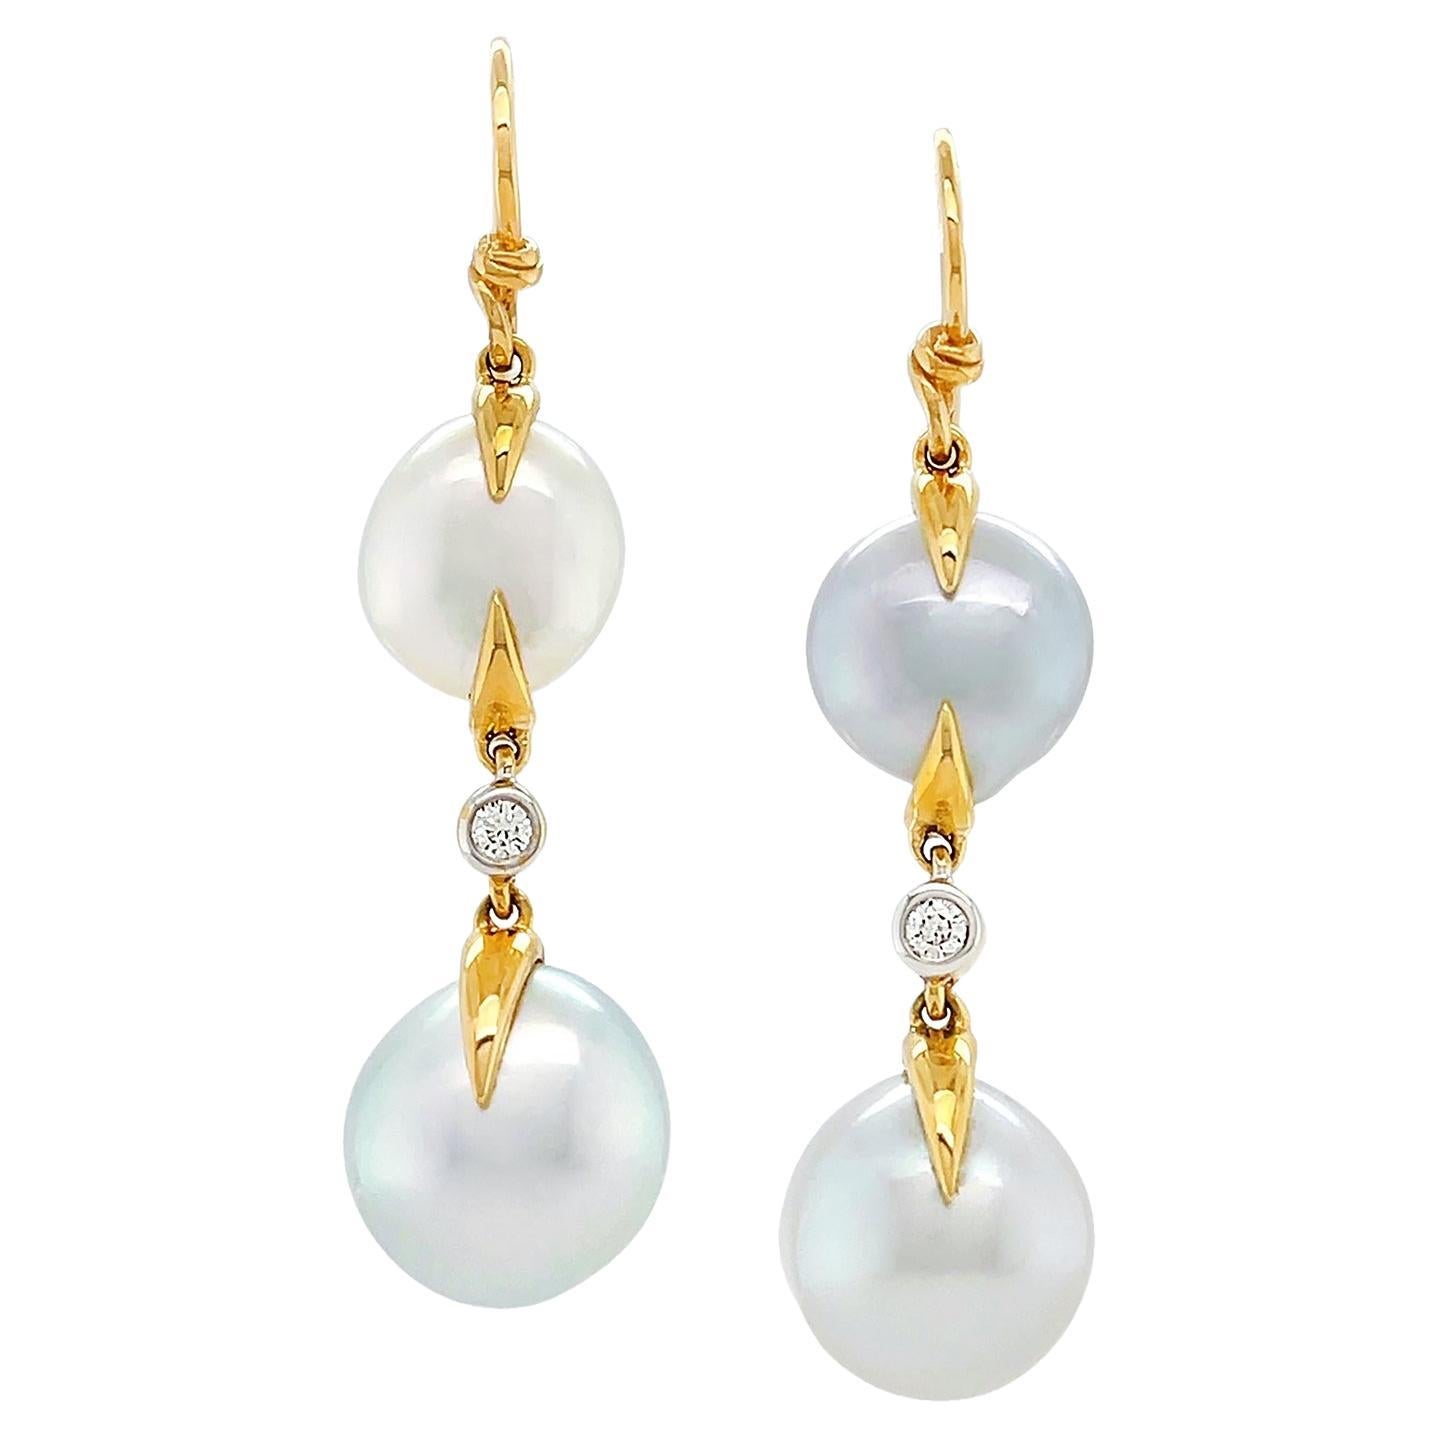 The elegance of the keshi pearl is combined with gold. 18k yellow gold knots suspend two keshi pearls in a disk shape with baroque texture. The pearls produce a satin texture as the light falls on them. In between a bezel set brilliant cut diamond